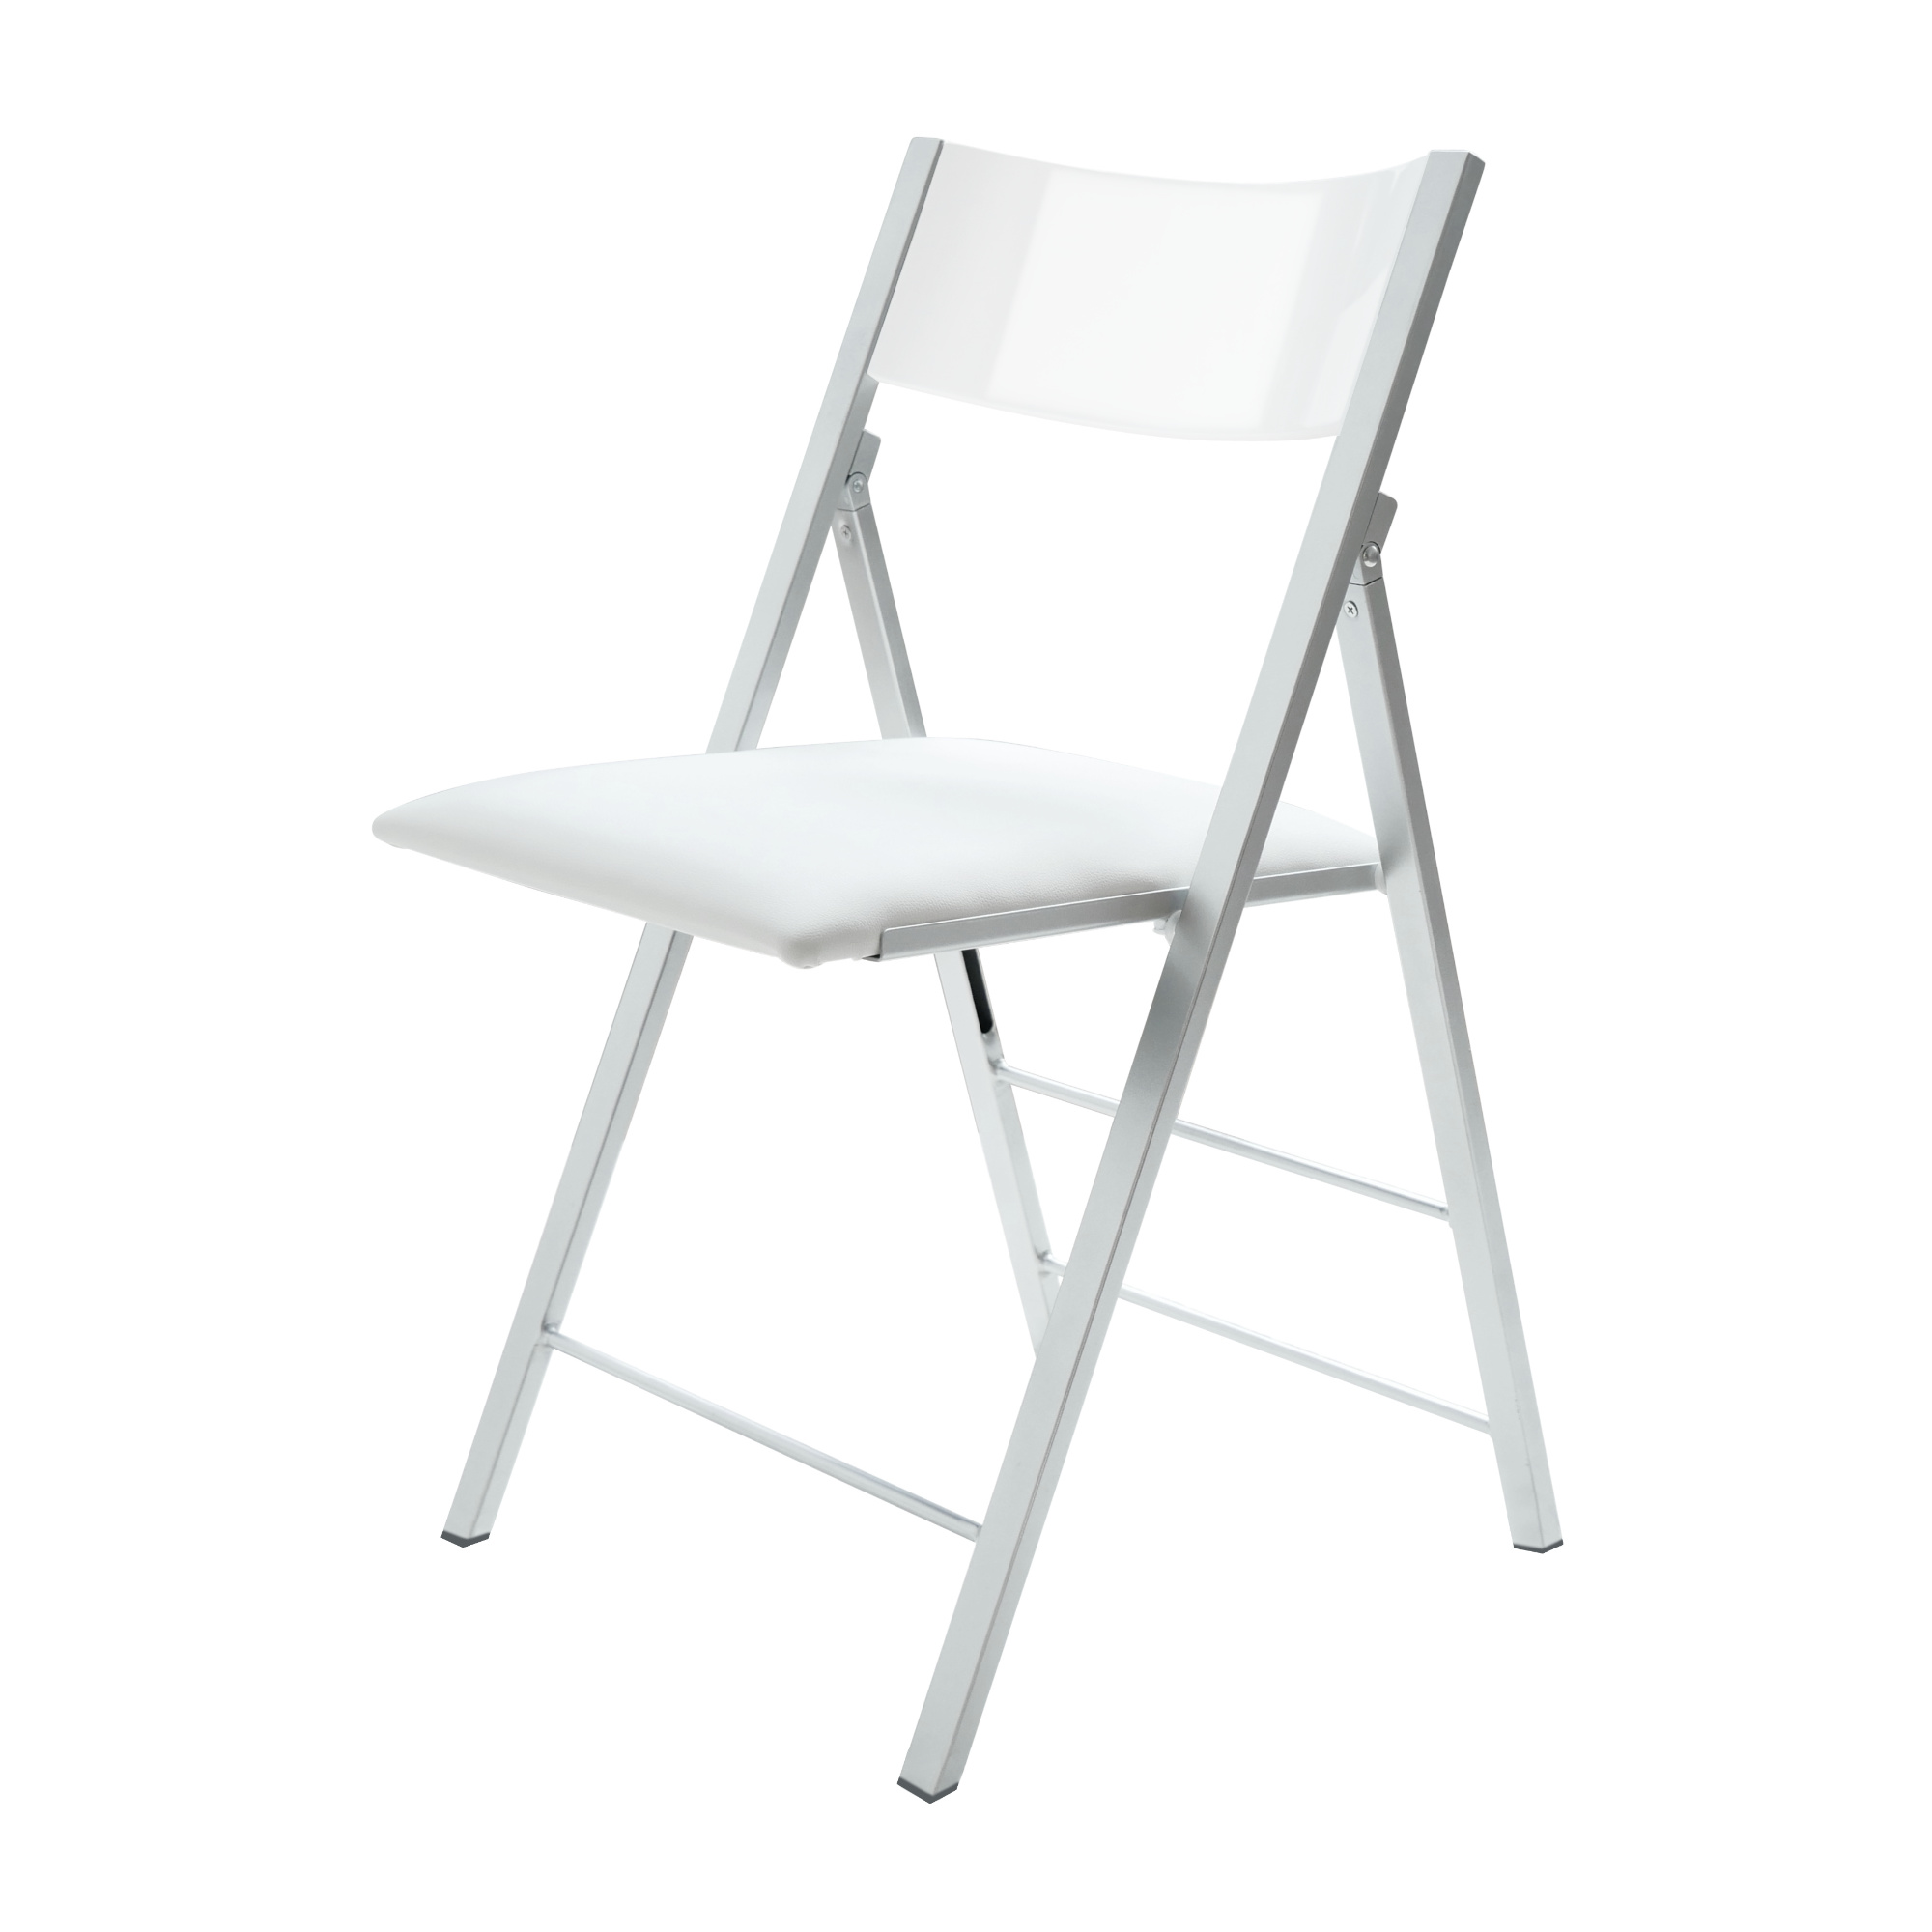 https://expandfurniture.com/wp-content/uploads/2014/10/8a-Nano-folding-chair-in-white-from-left-3-quarter-angle-glossy-white-bright.jpg